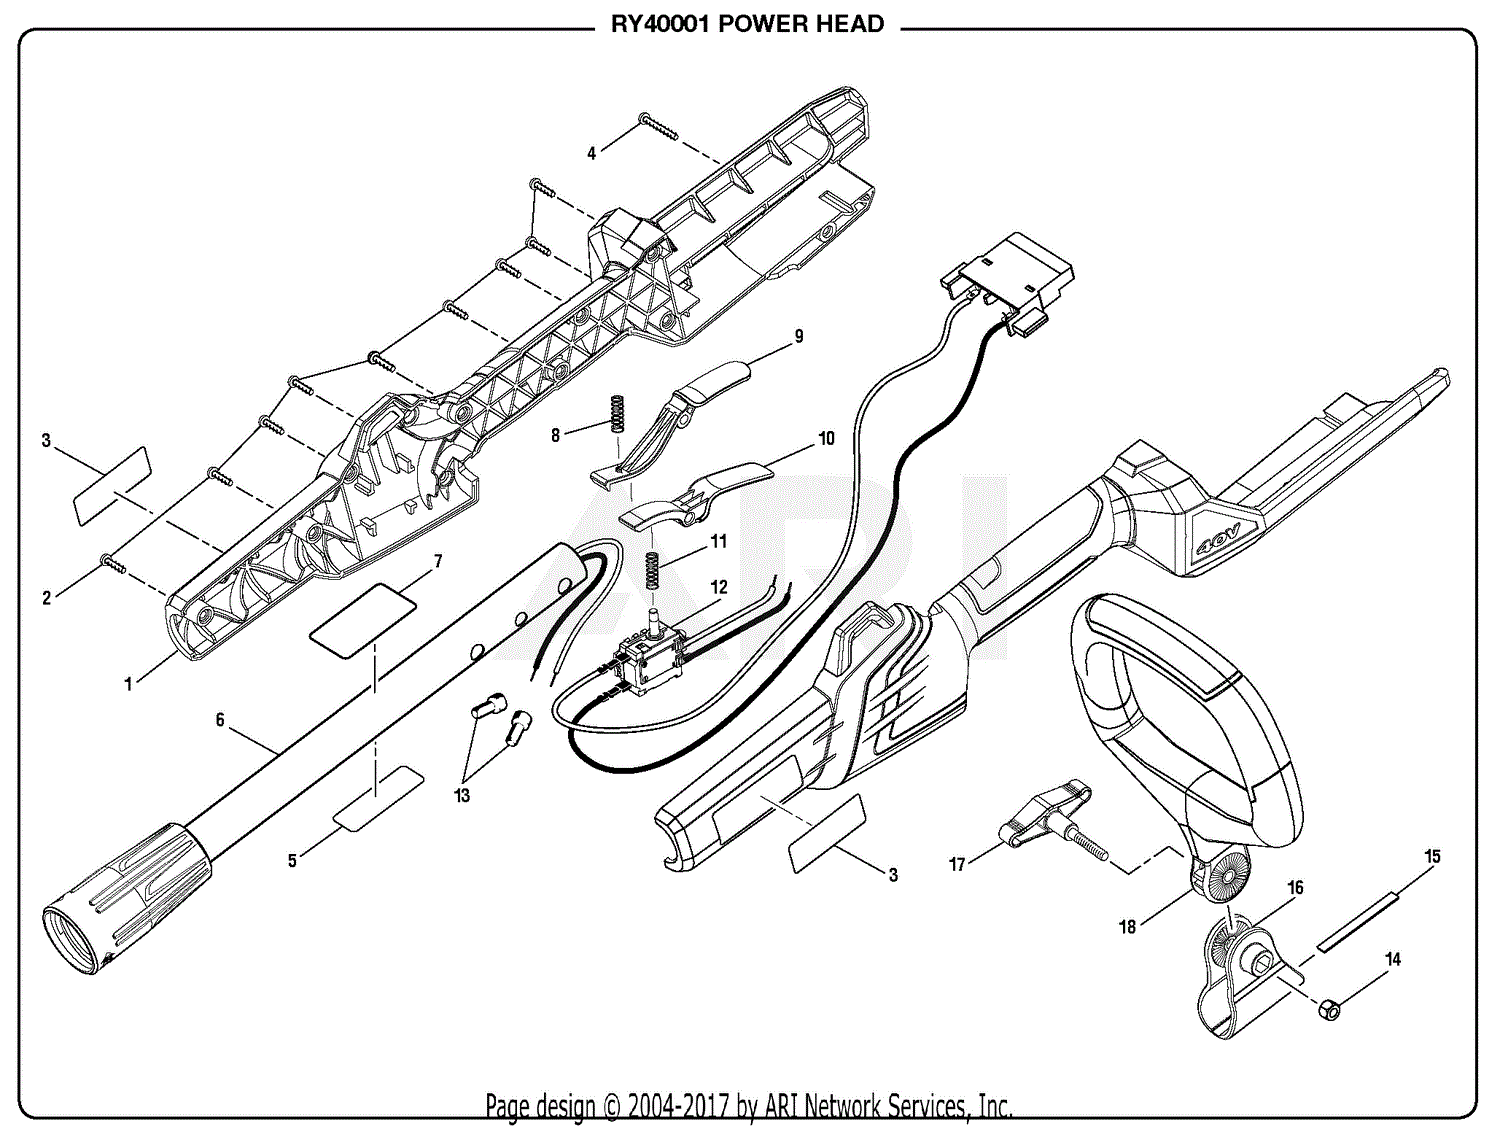 Homelite Ry40001 Power Head Parts Diagram For General Assembly